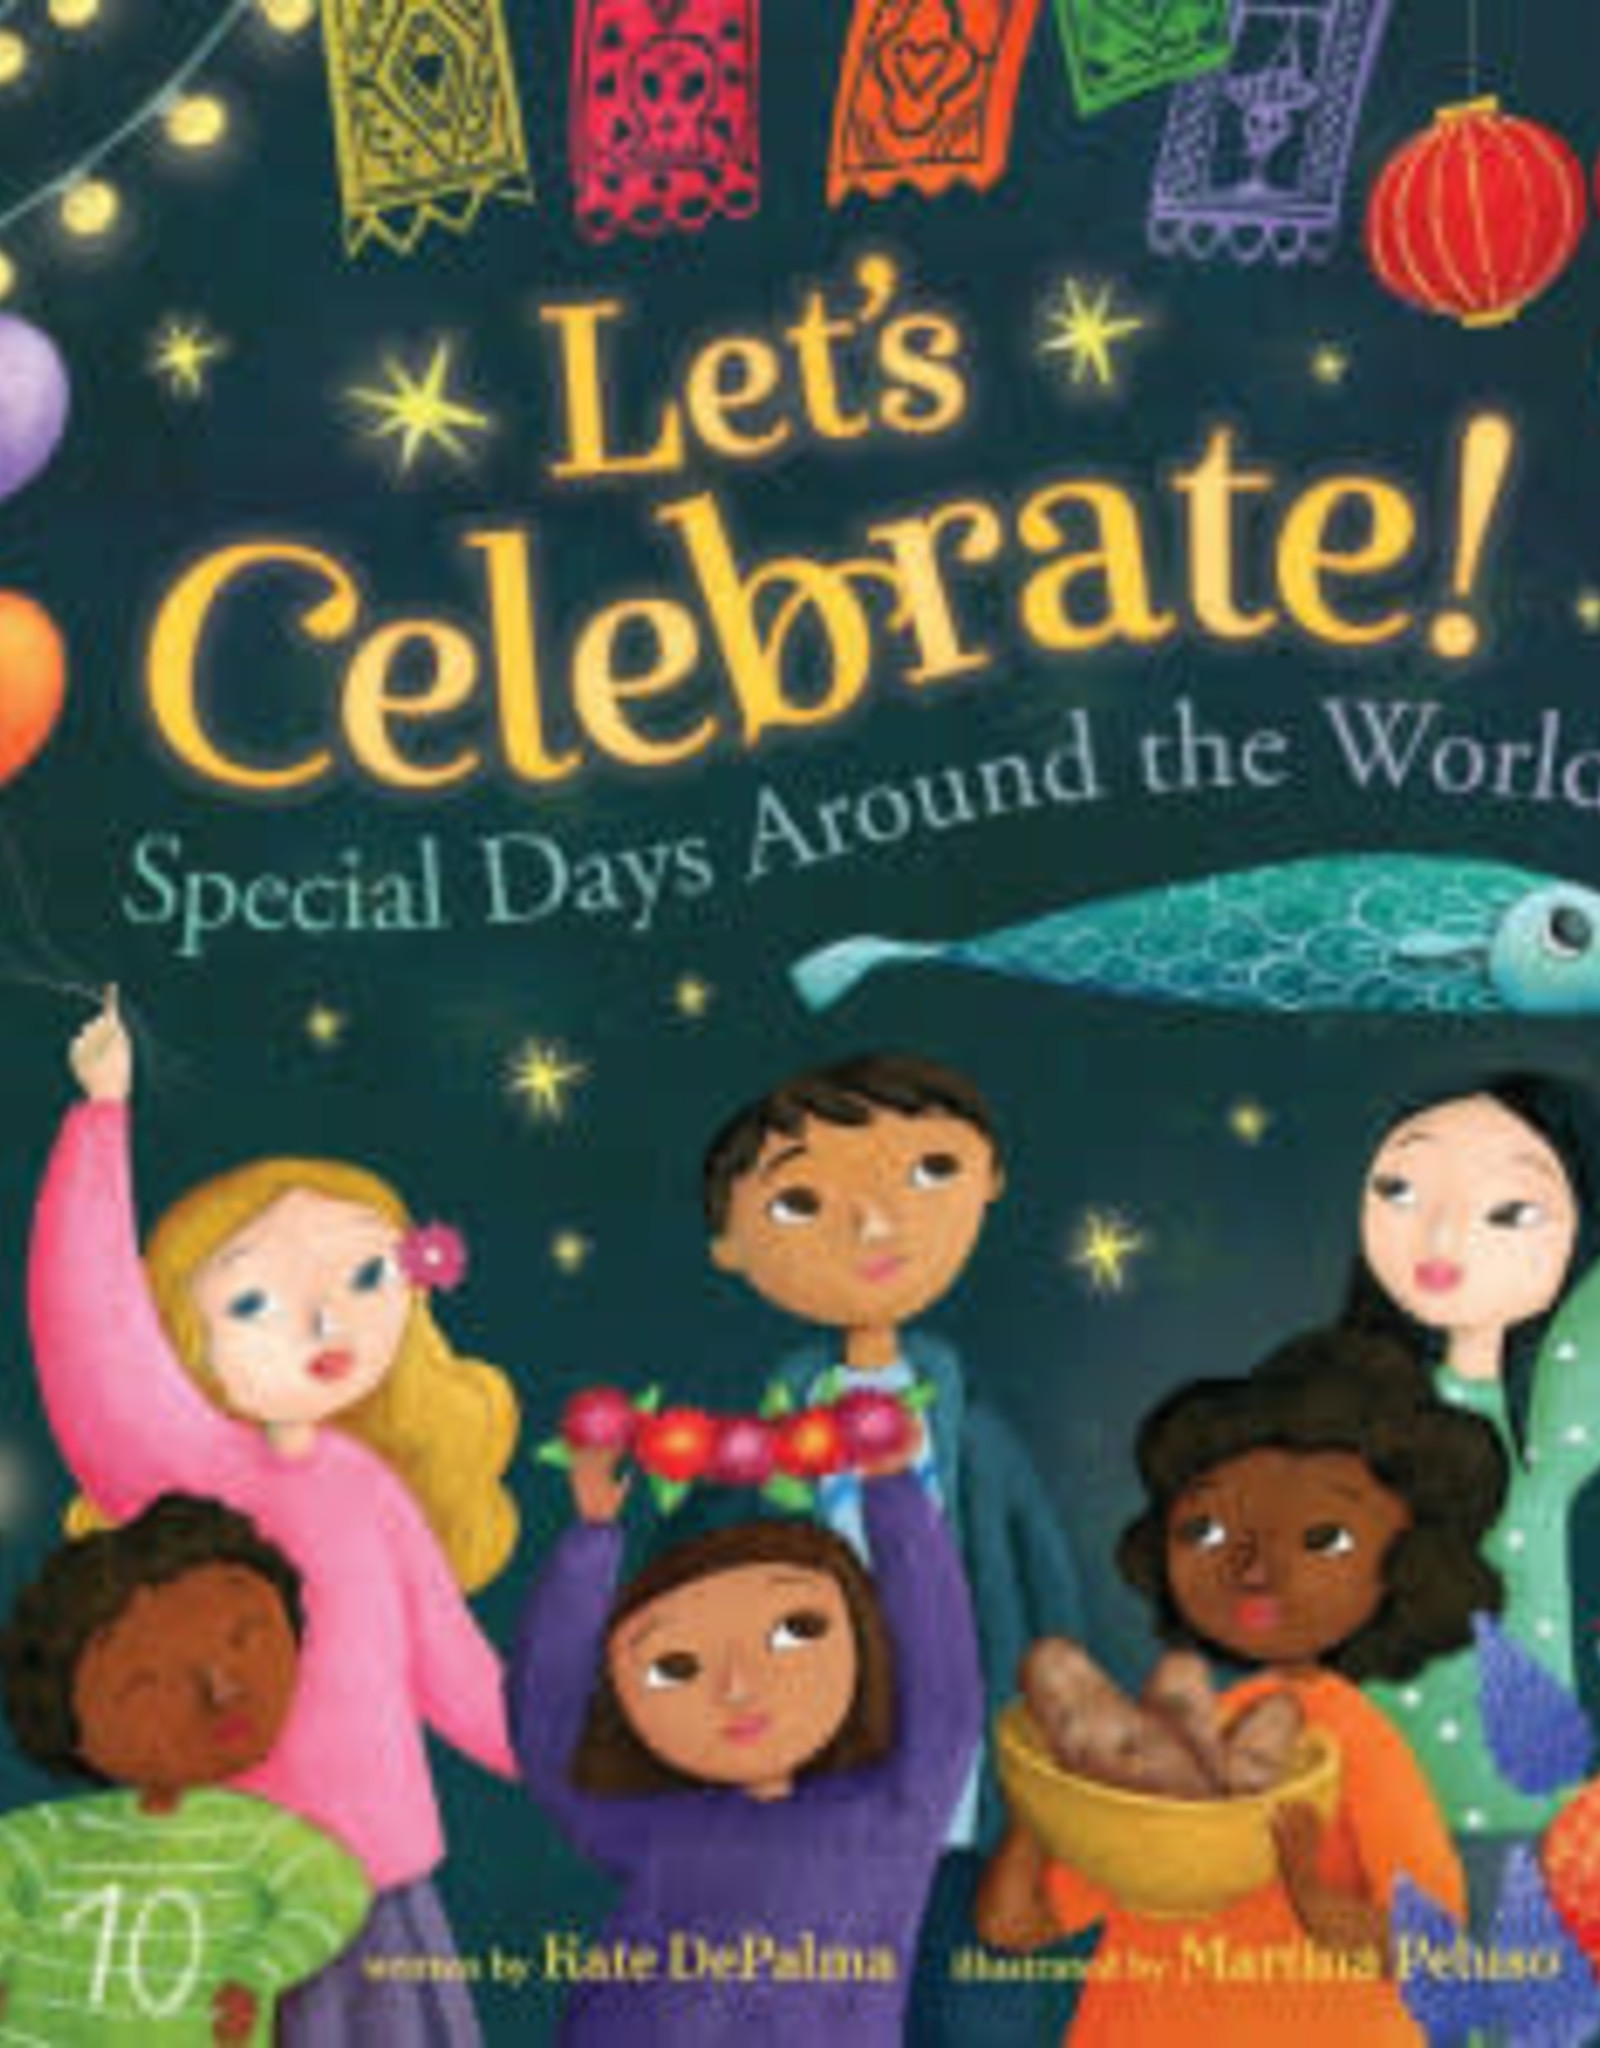 World　Celebrate!:　Let's　Bunyaad　Around　Special　Days　the